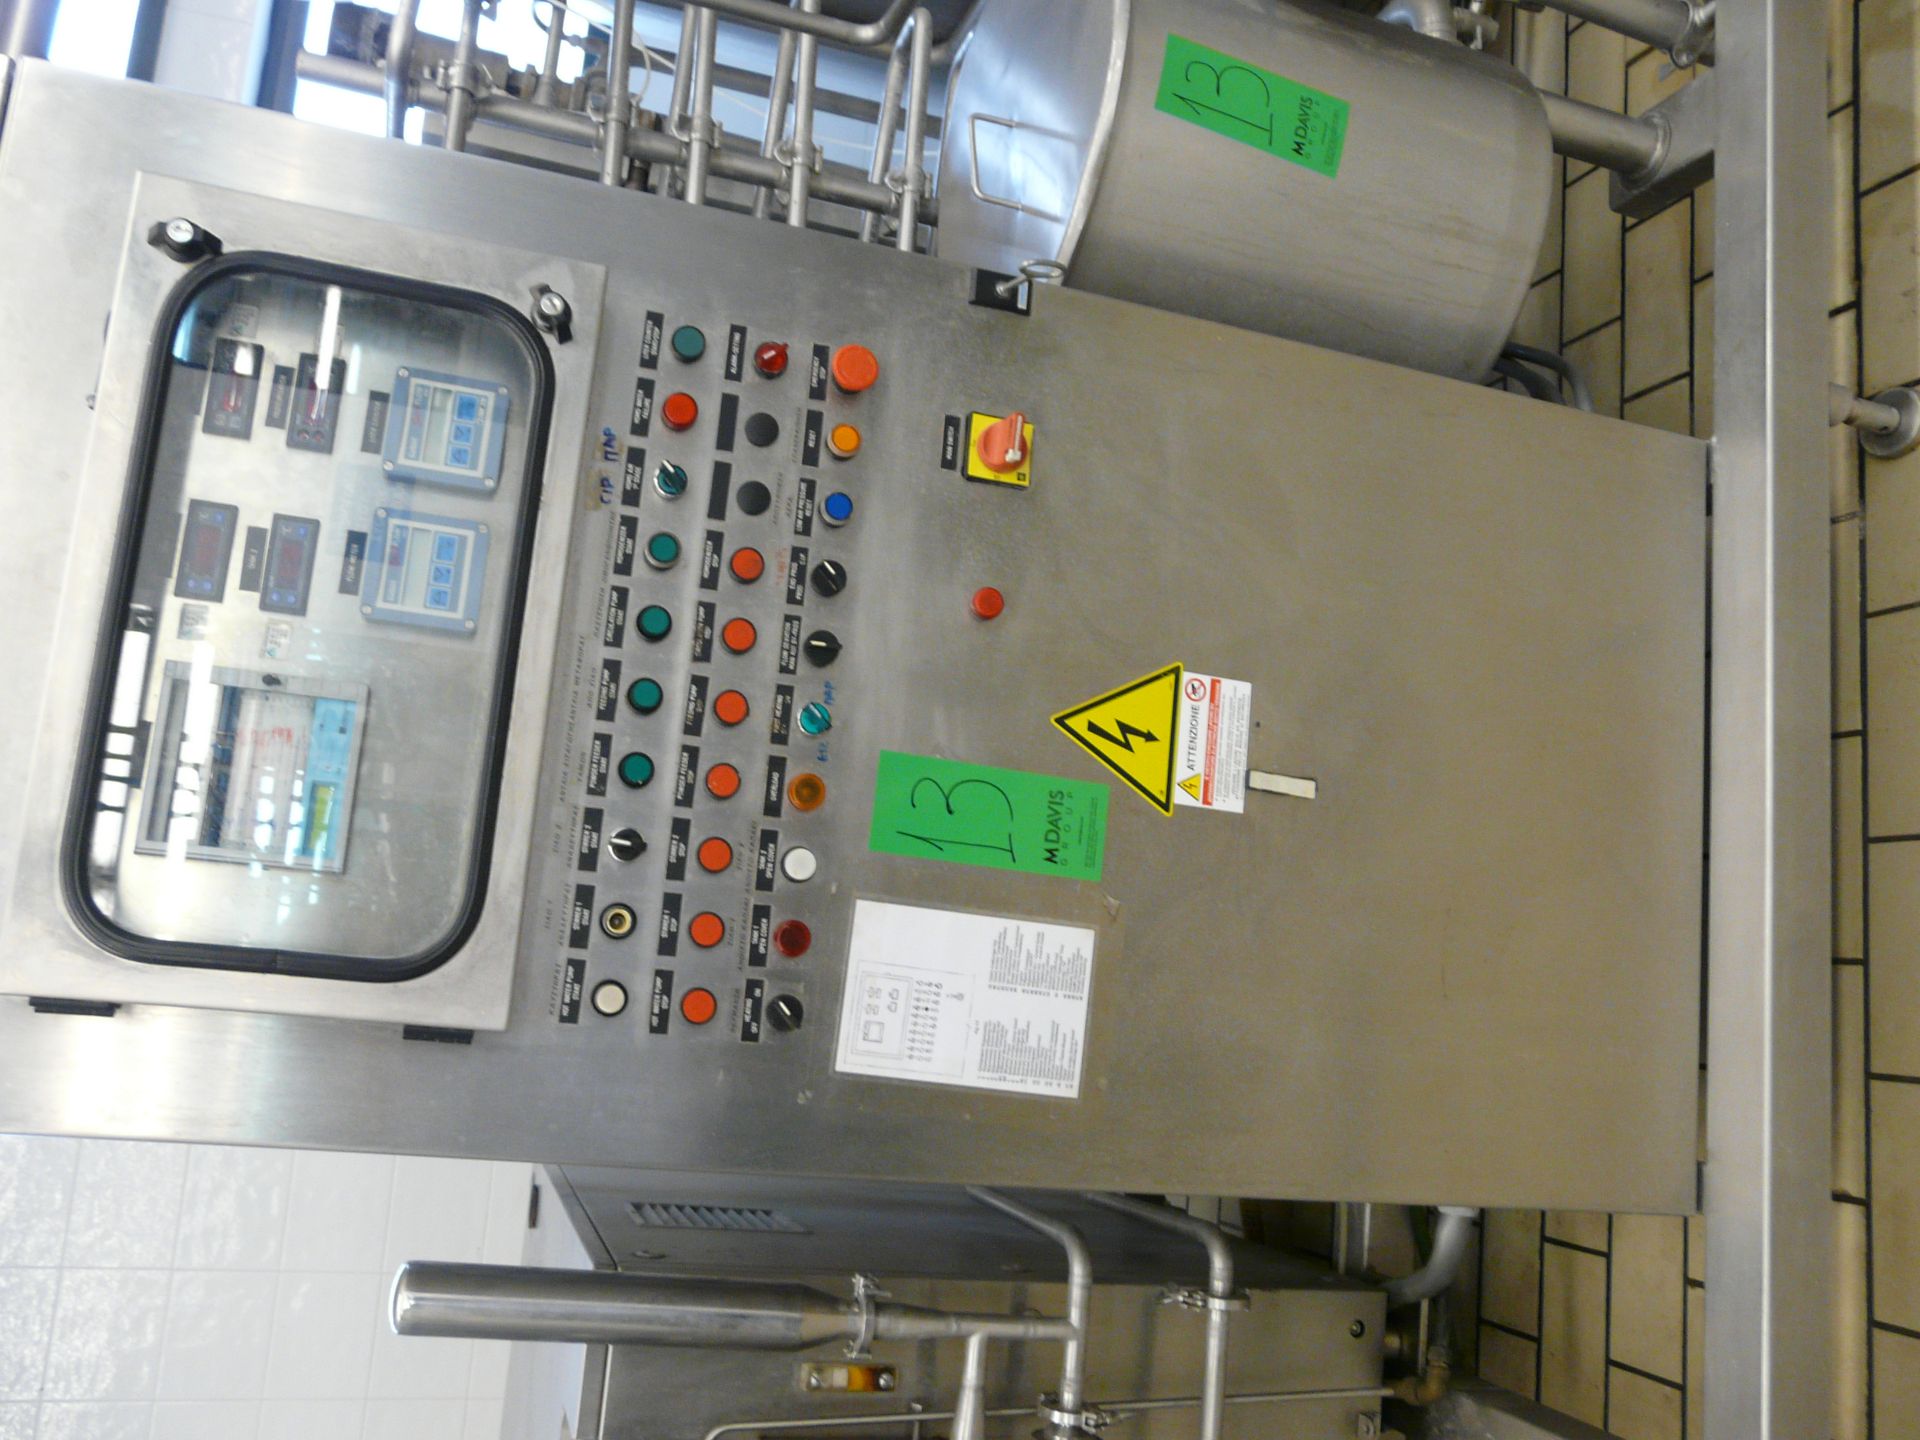 English: TETRA PAK HOYER HTST SYSTEM, 1200 Pasteurizer for Ice Cream, Contains 2 x Tanks with - Bild 7 aus 45